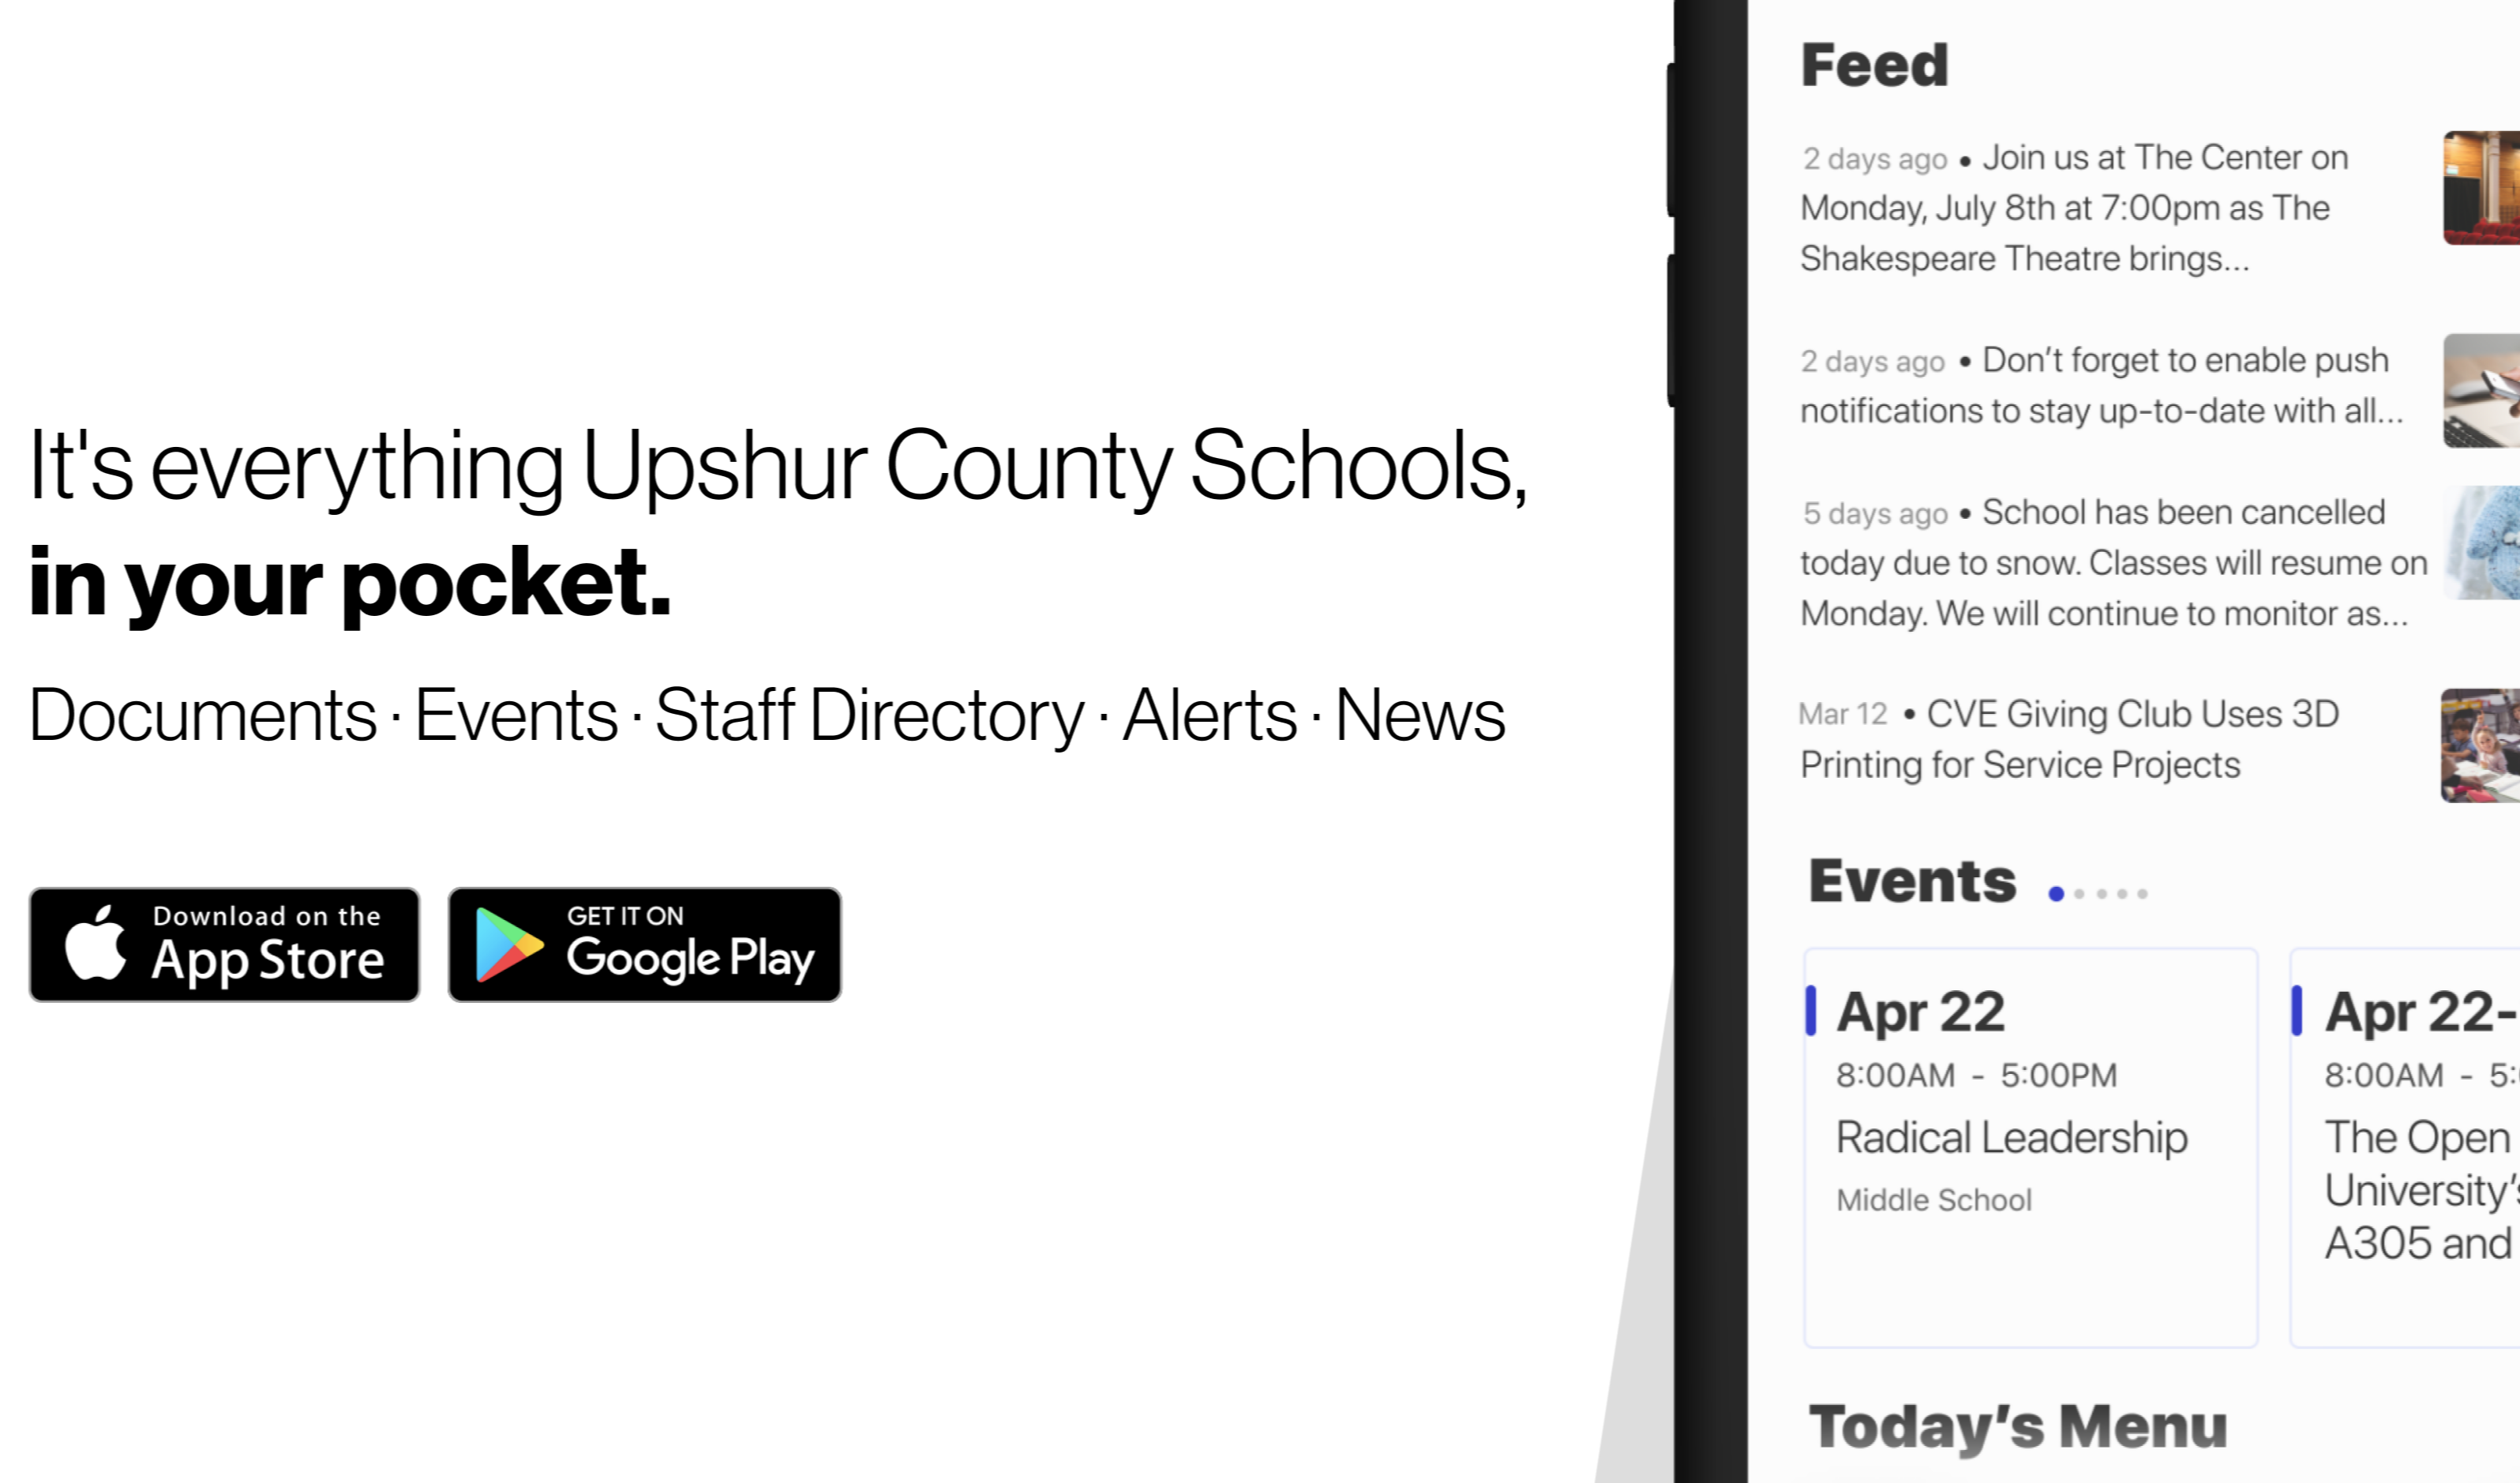 It's everything Upshur County Schools in your pocket. Documents, Events, Alerts, Staff Directory, News. Download in Google Play or App Store.